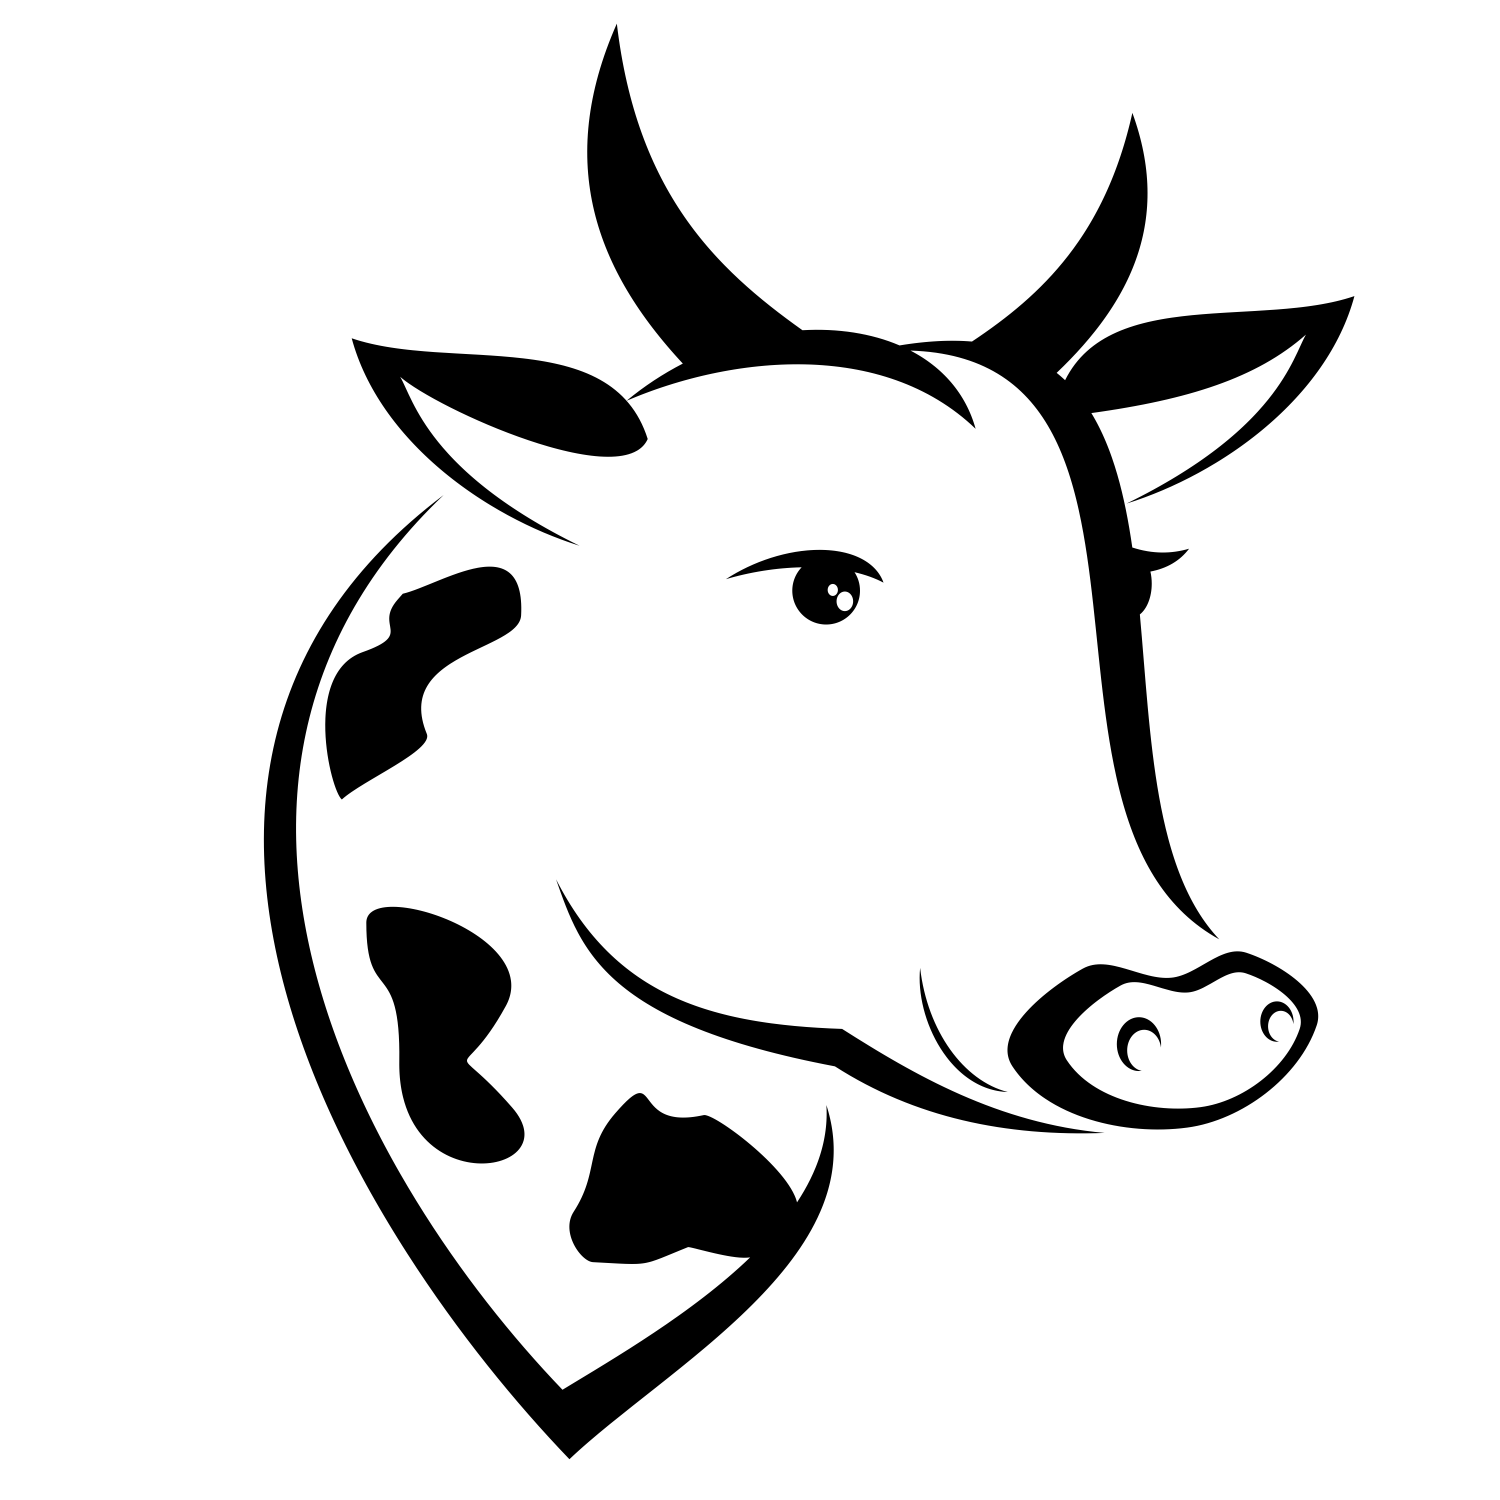 cow cdr clipart - photo #5